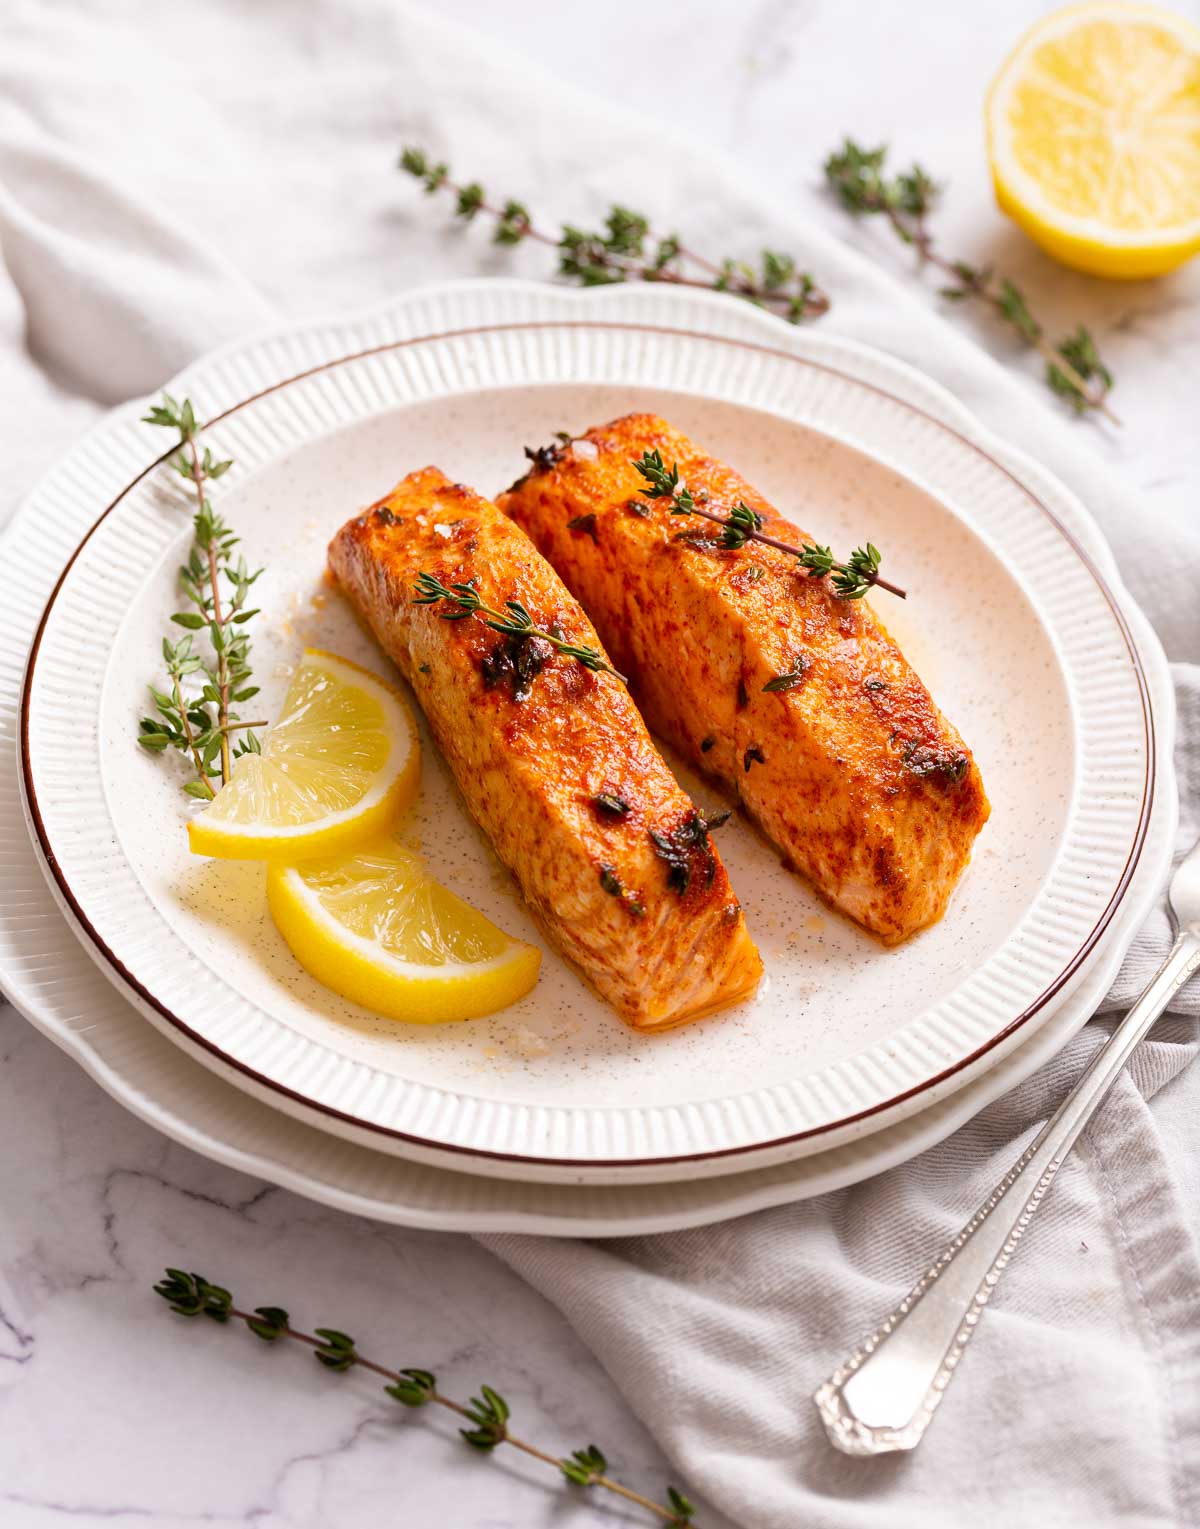 Keto Air Fryer salmon brushed with a seasoning oil.